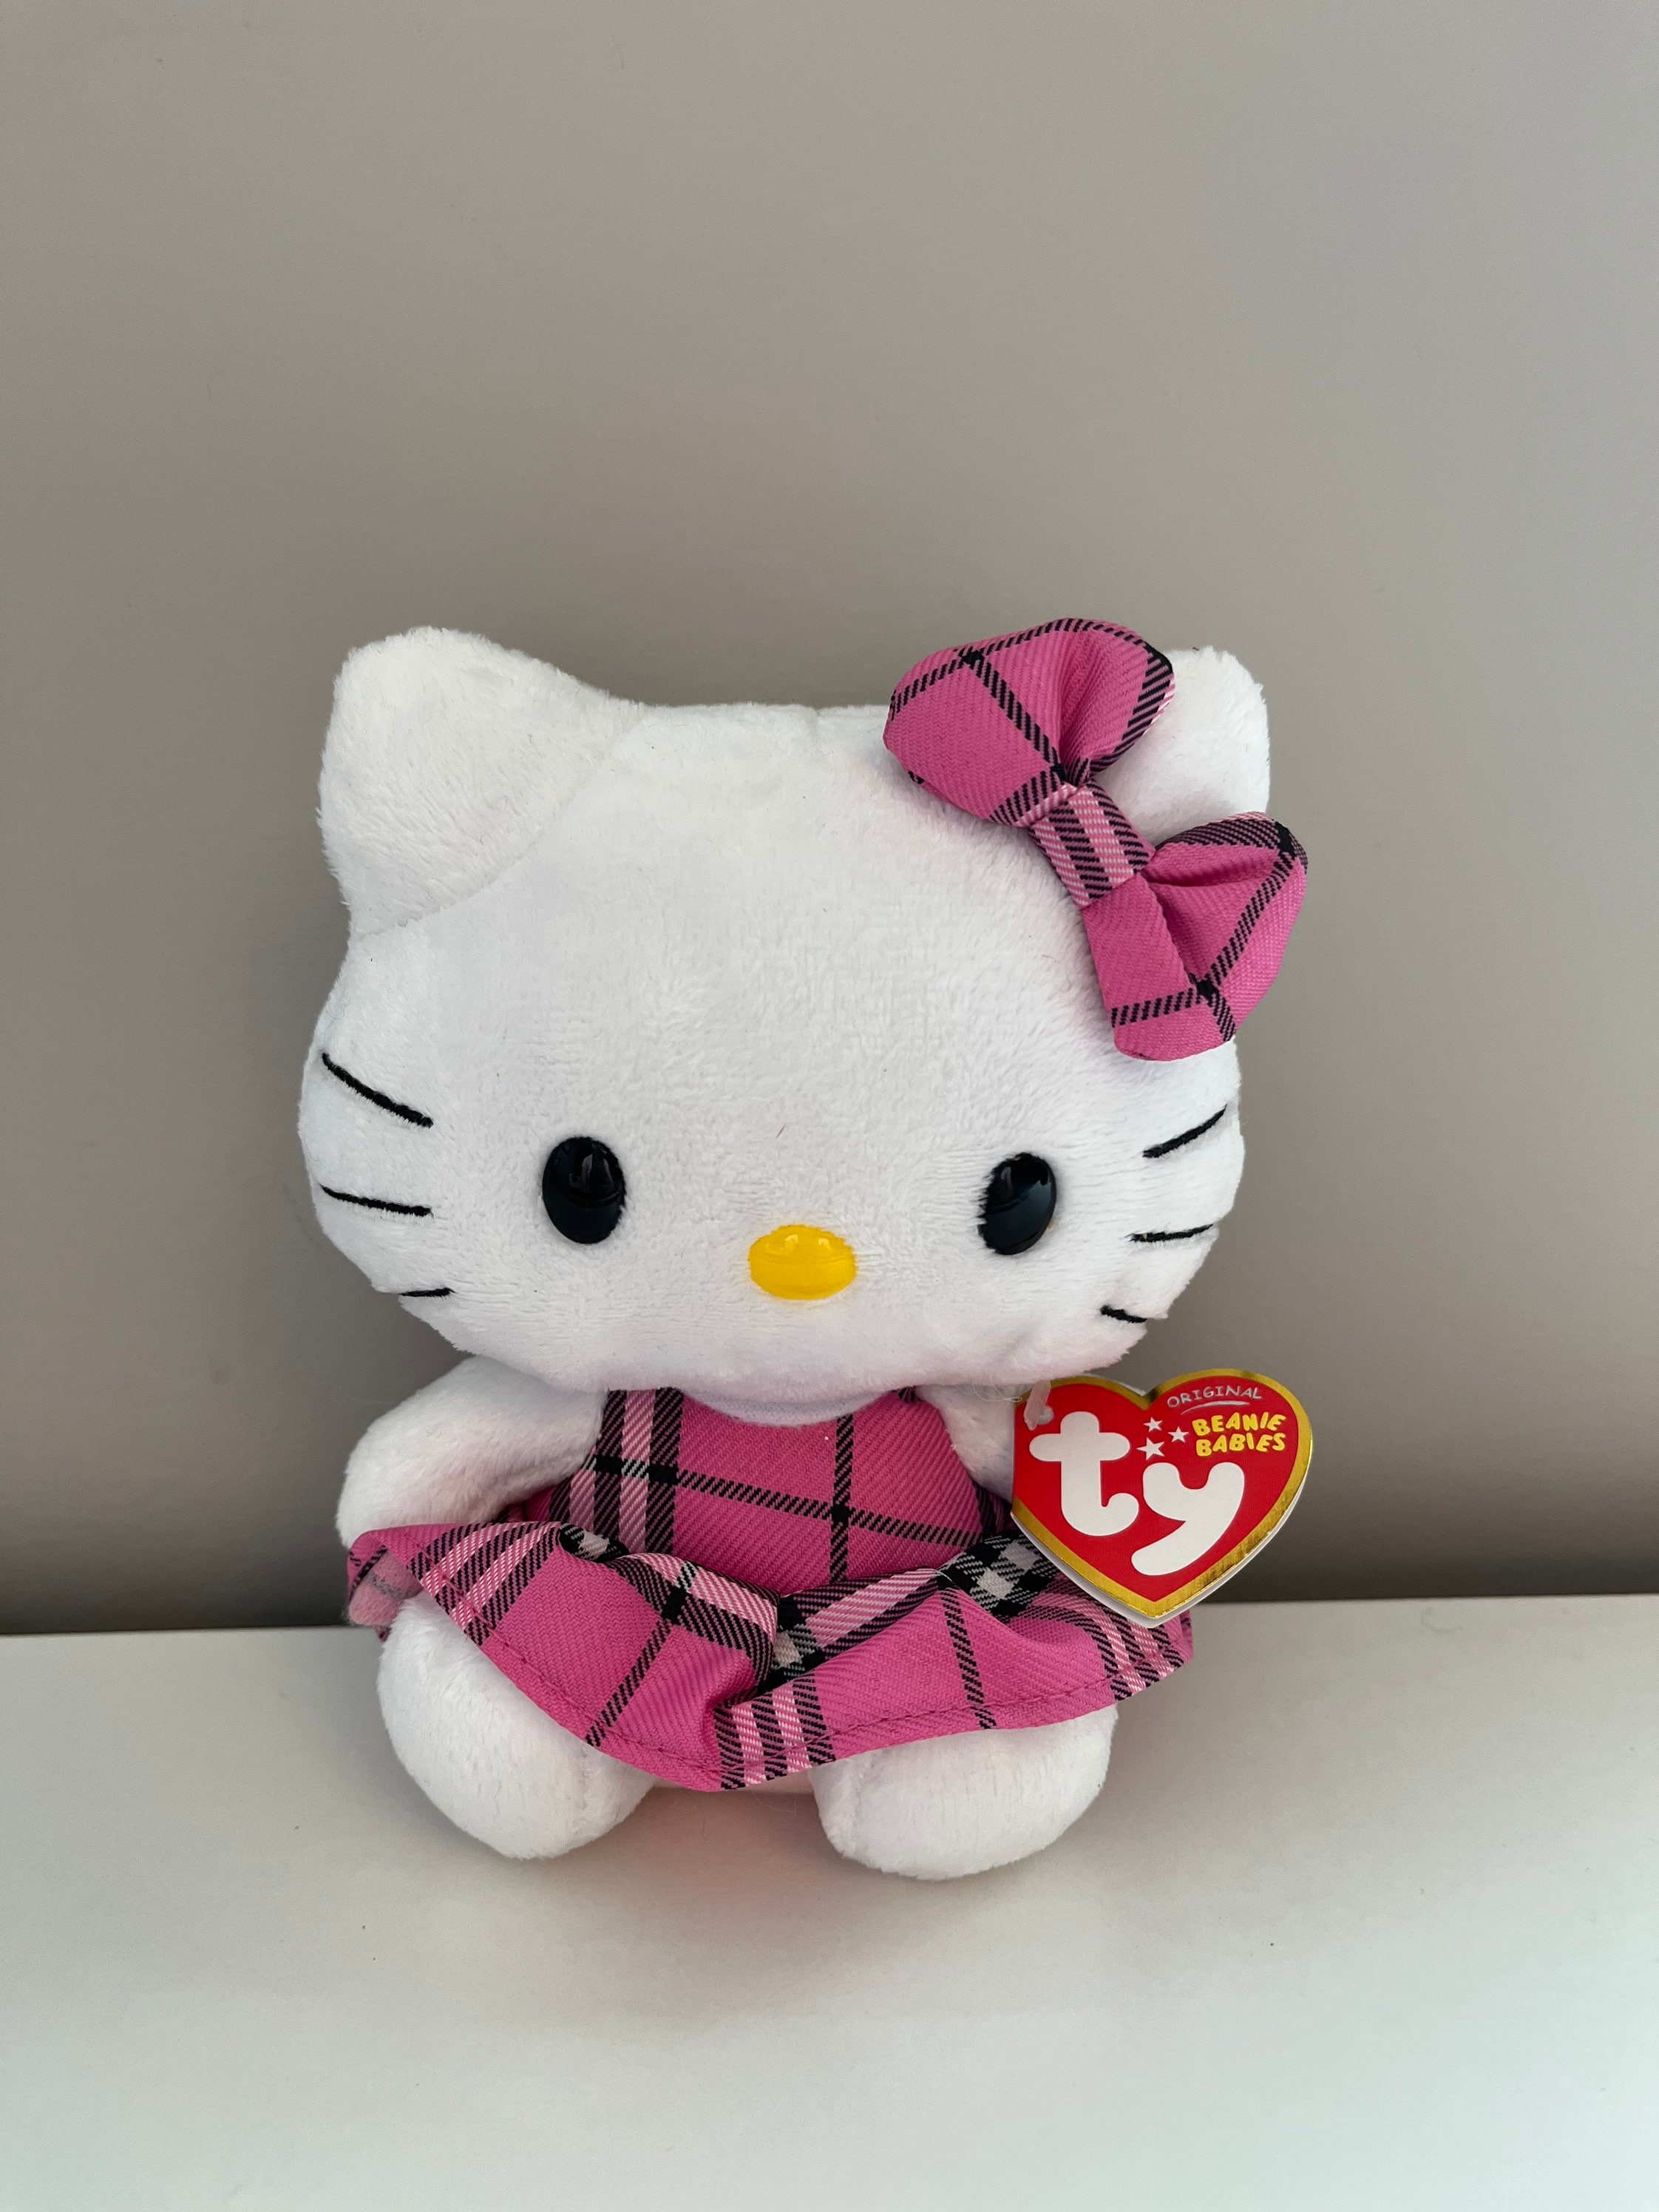 Ty Beanie Baby hello Kitty the Hello Kitty Plush in Pink Plaid 5.5